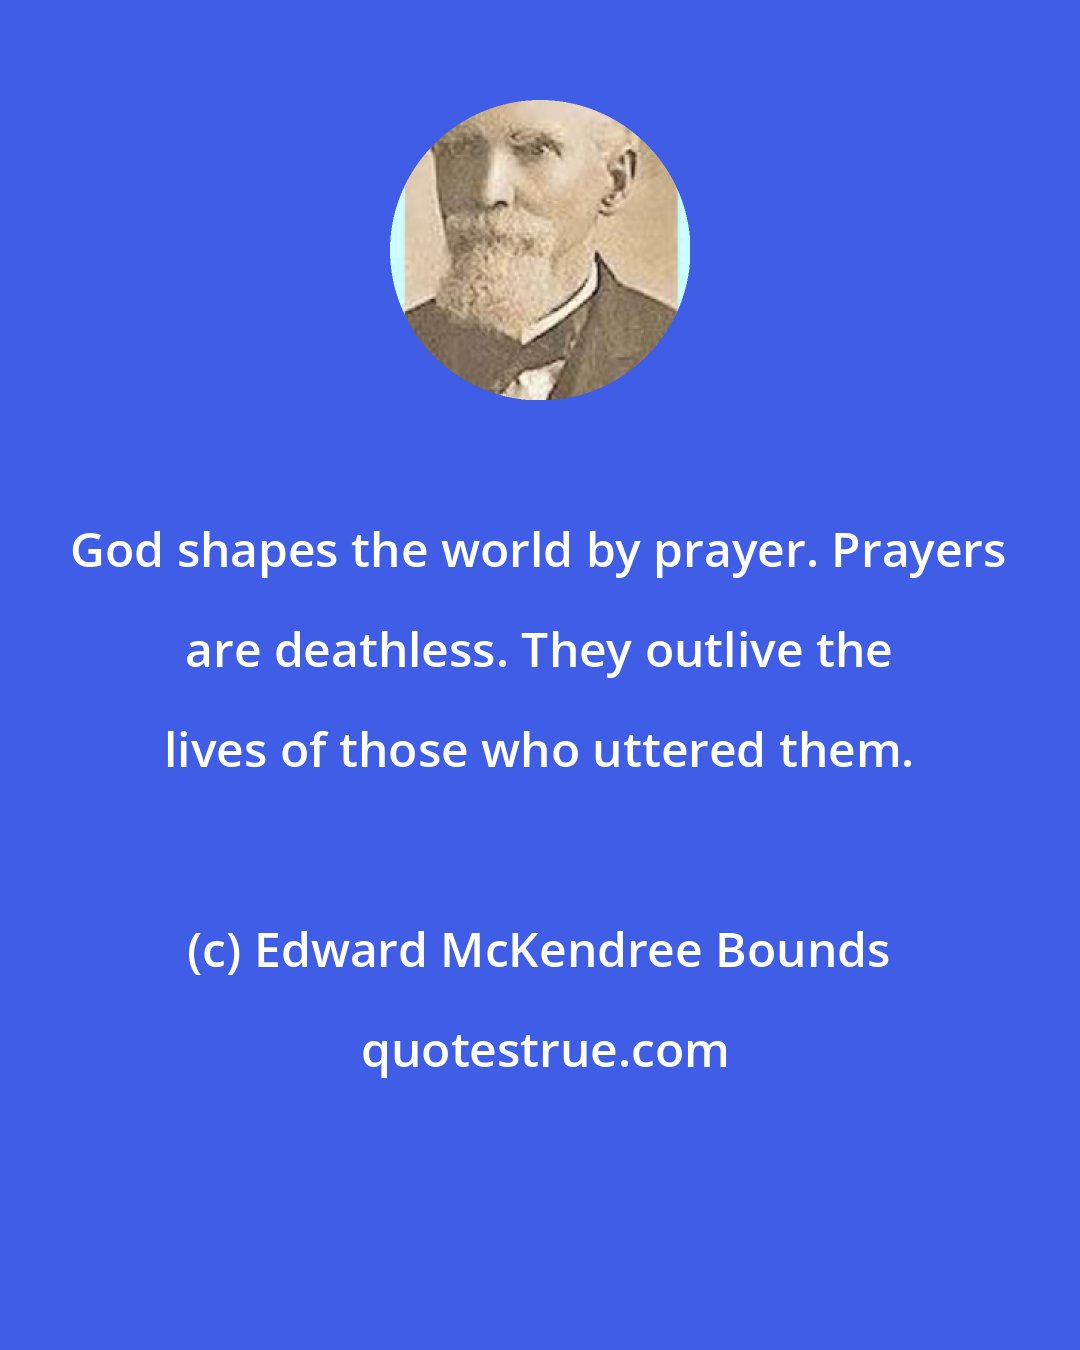 Edward McKendree Bounds: God shapes the world by prayer. Prayers are deathless. They outlive the lives of those who uttered them.